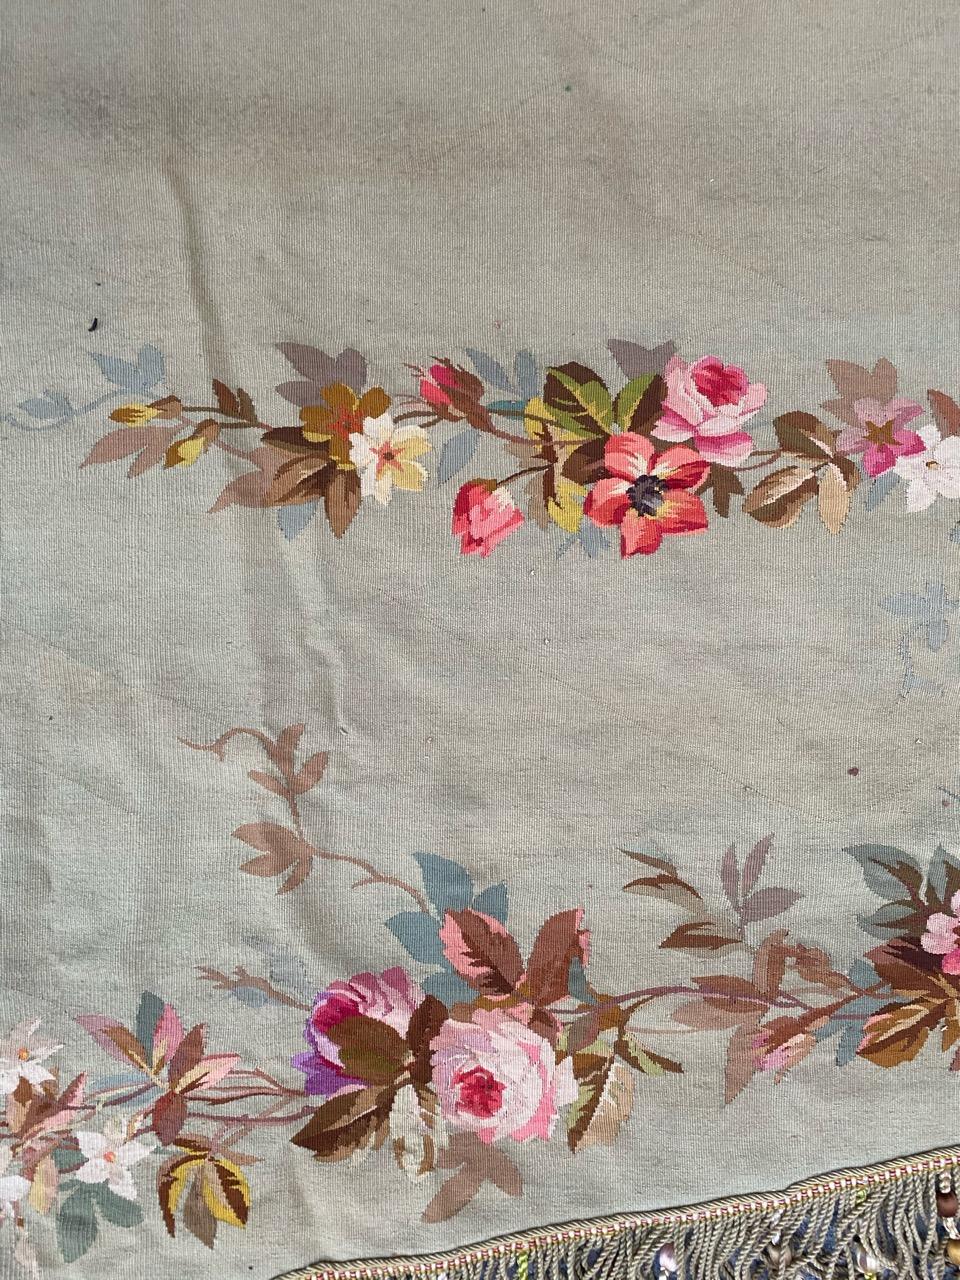 Hand-Woven Wonderful French Valance Aubusson Tapestry